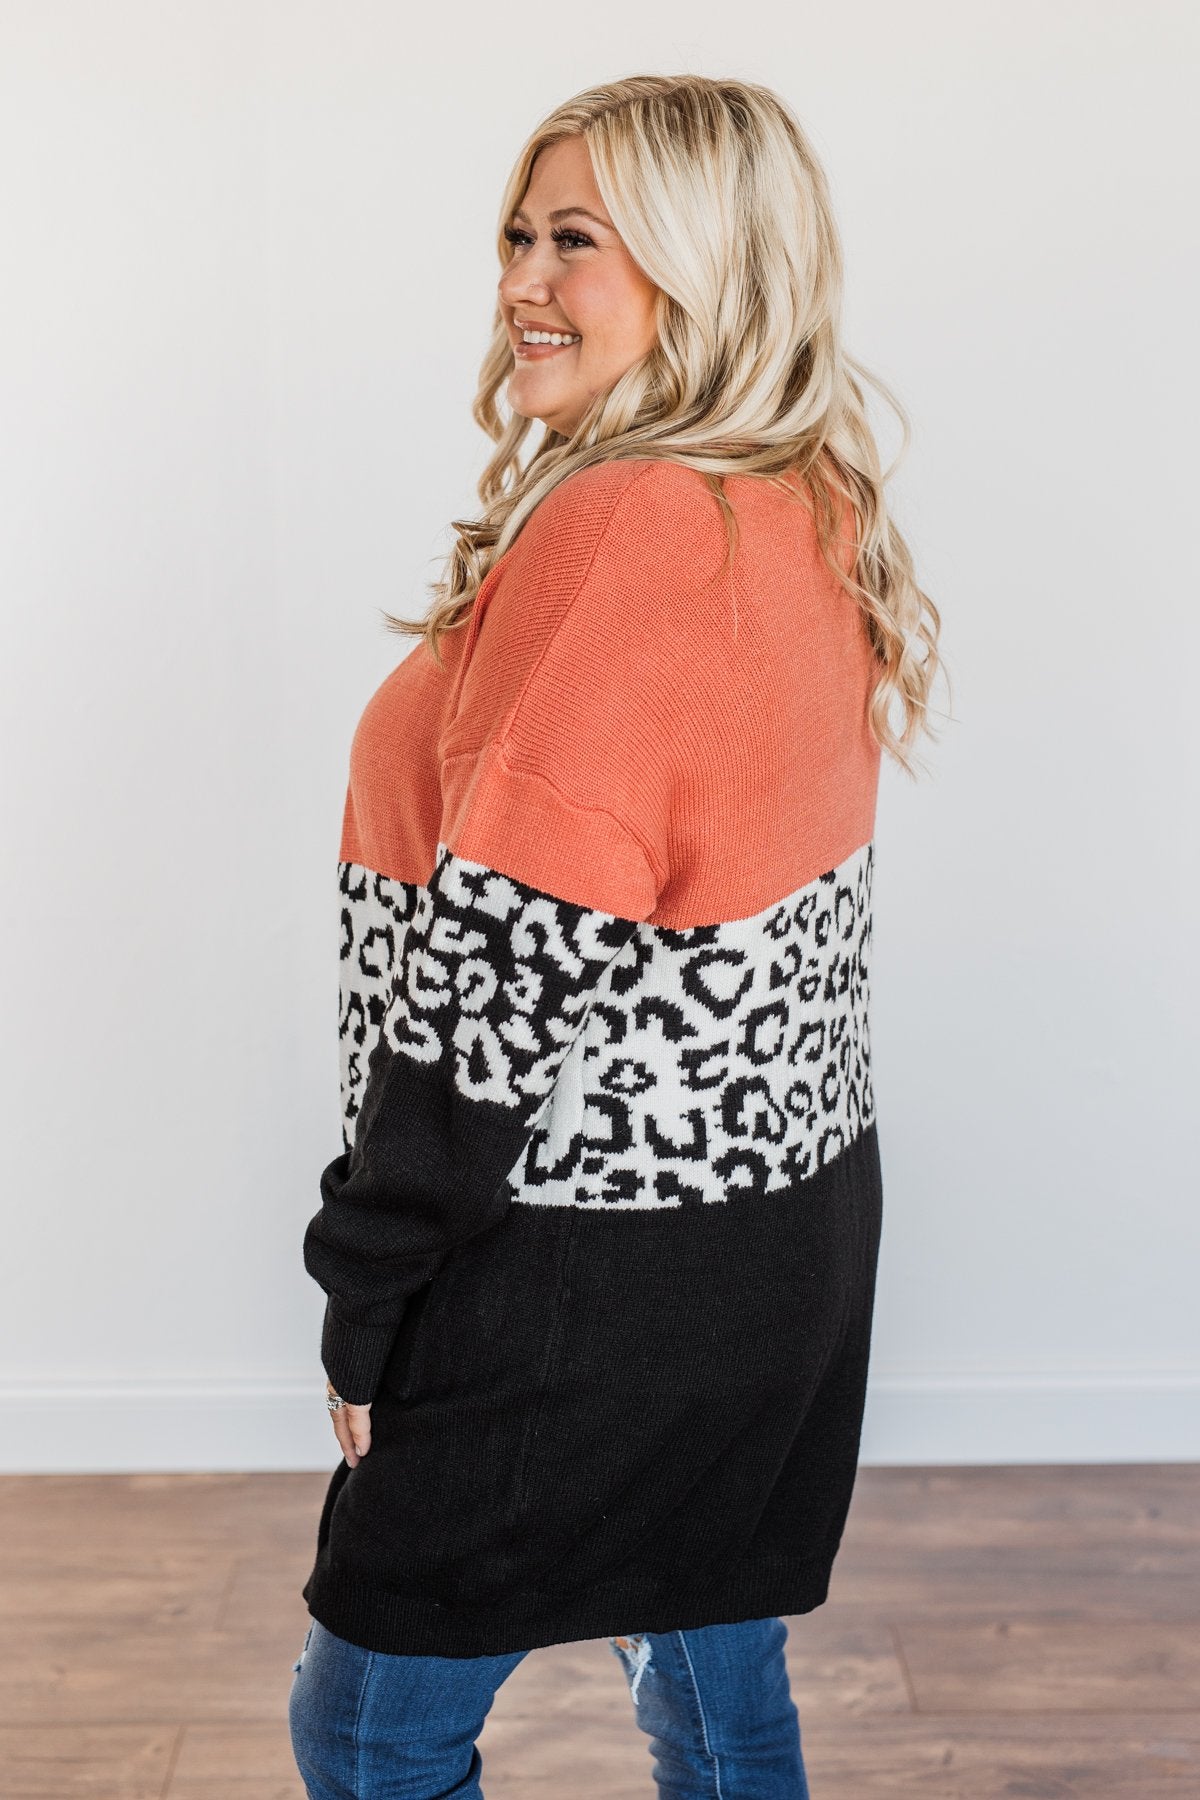 Grow Wild Color Block Cardigan- Coral, Black, & Off-White